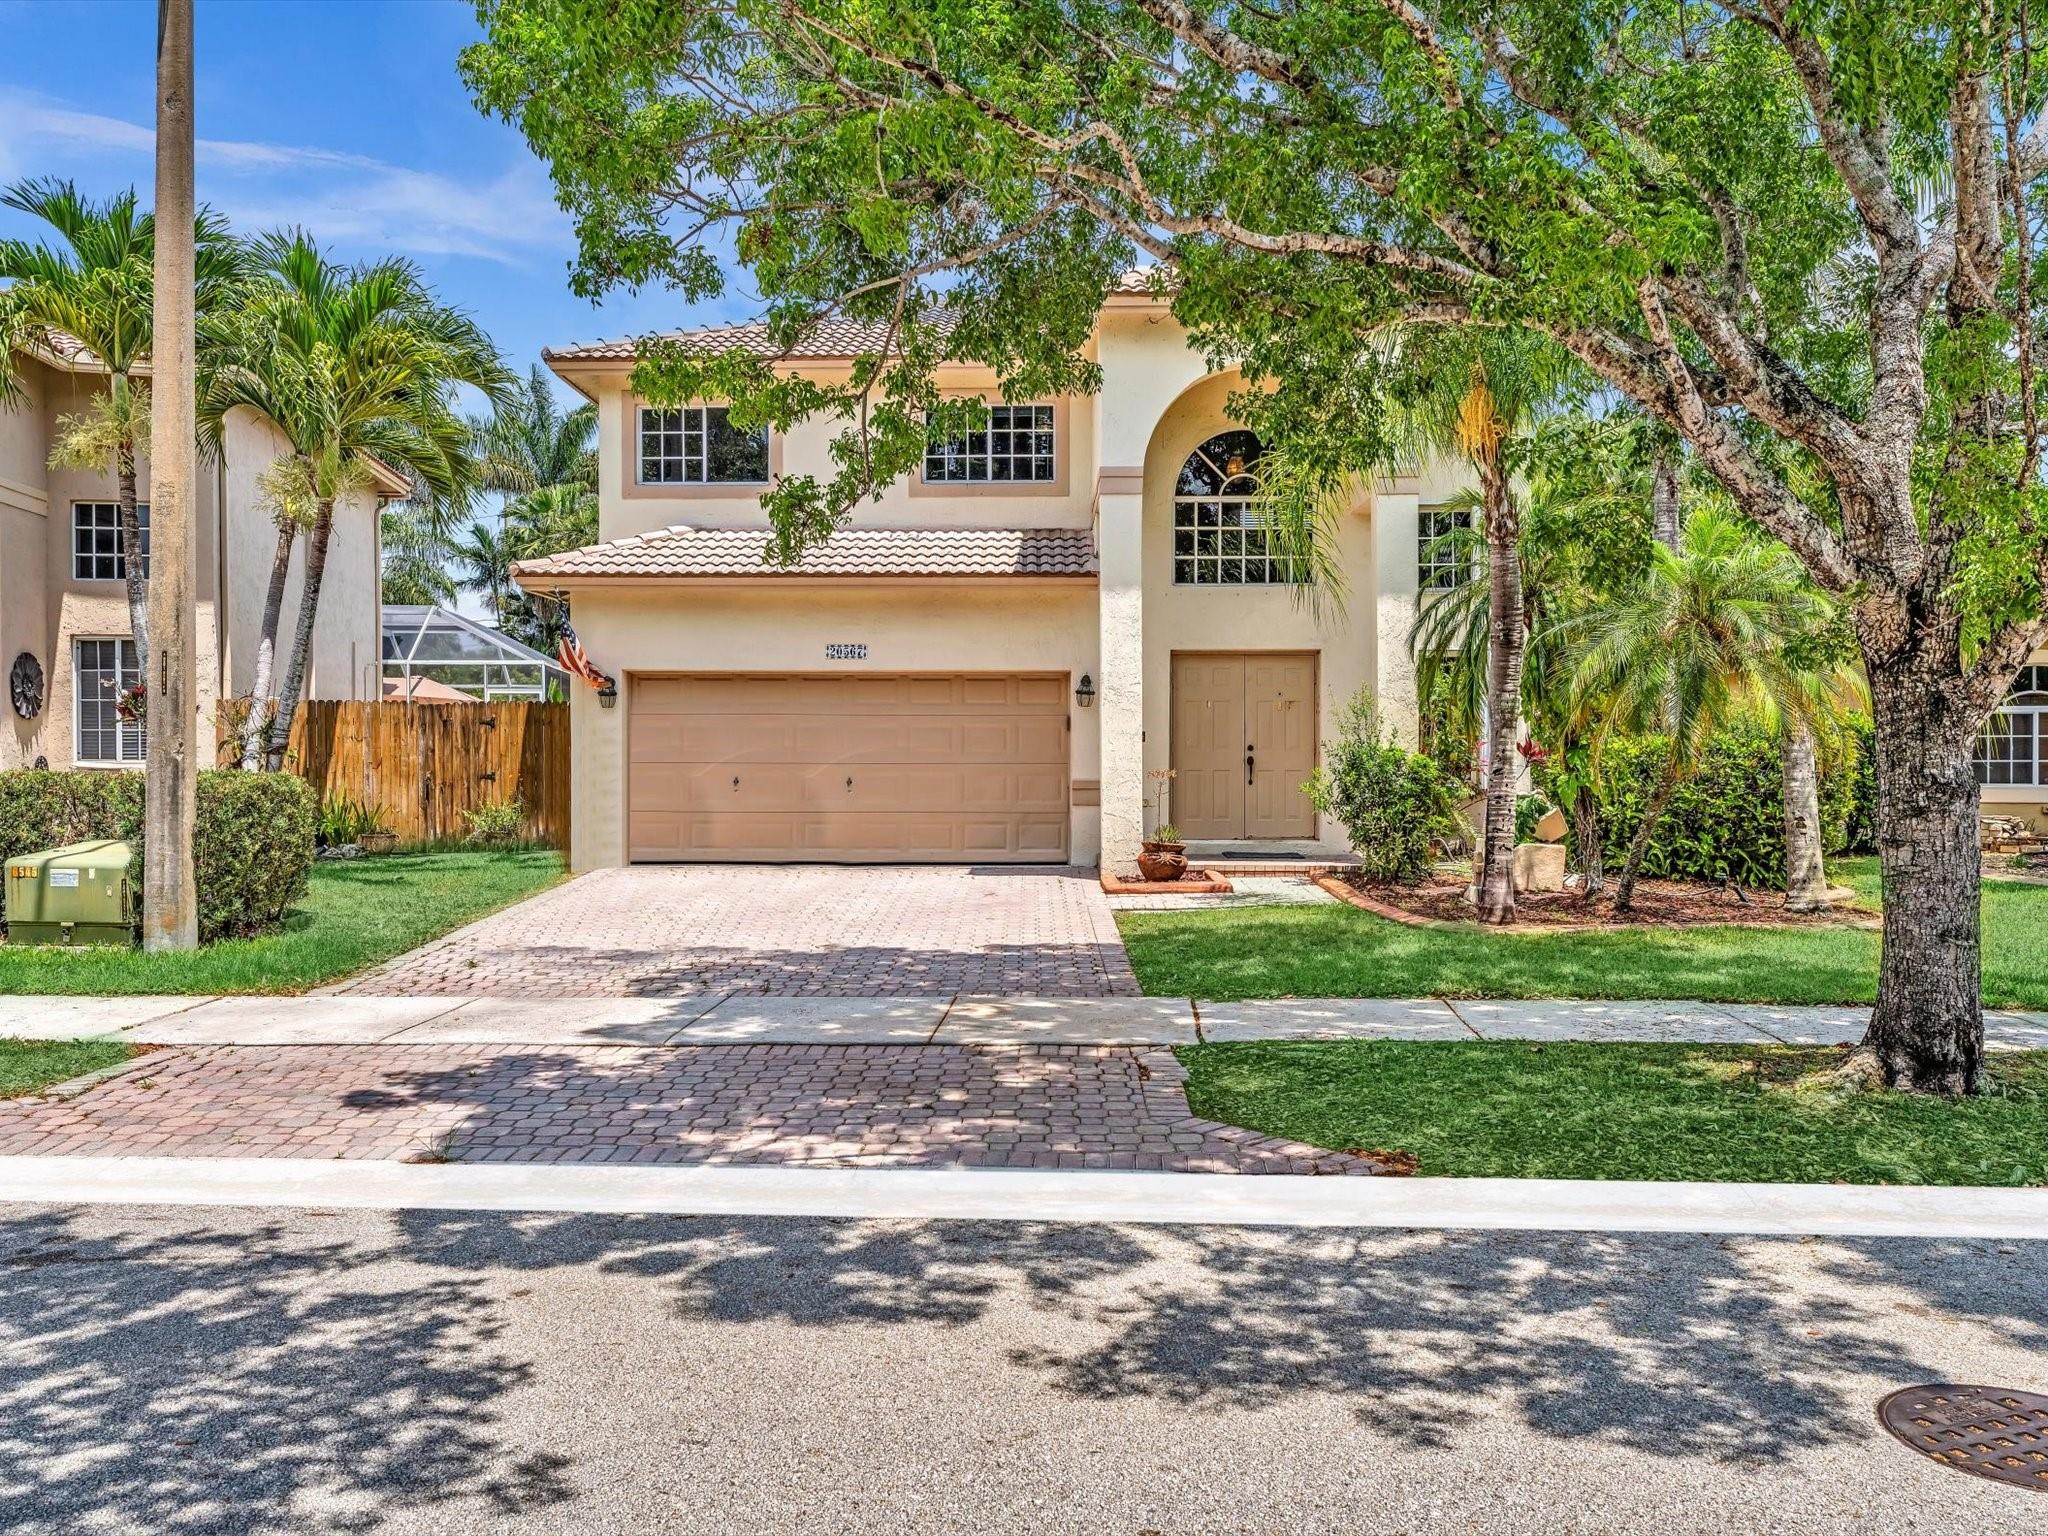 Presenting an extraordinary find in Pembroke Pines! This 3 bed/2.5 bath home features a 2 car garage with laundry, spacious loft, screened in pool, & a backyard that offers ample space for outdoor enjoyment in this sought-after neighborhood. With vast potential for personalization, this property needs a full update and awaits your creative touch. Original roof reflected in price, 2010 AC, 2012 water heater. The remarkably low $129 monthly association fee is the cherry on top & delivers exceptional value. Don't miss out on the chance to transform this home into your dream sanctuary! Reserves $235,185. Include proof of funds, pre-approval, DU approval, or true mortgage commitment when submitting an offer. Appointment only, owner & pet occupied.